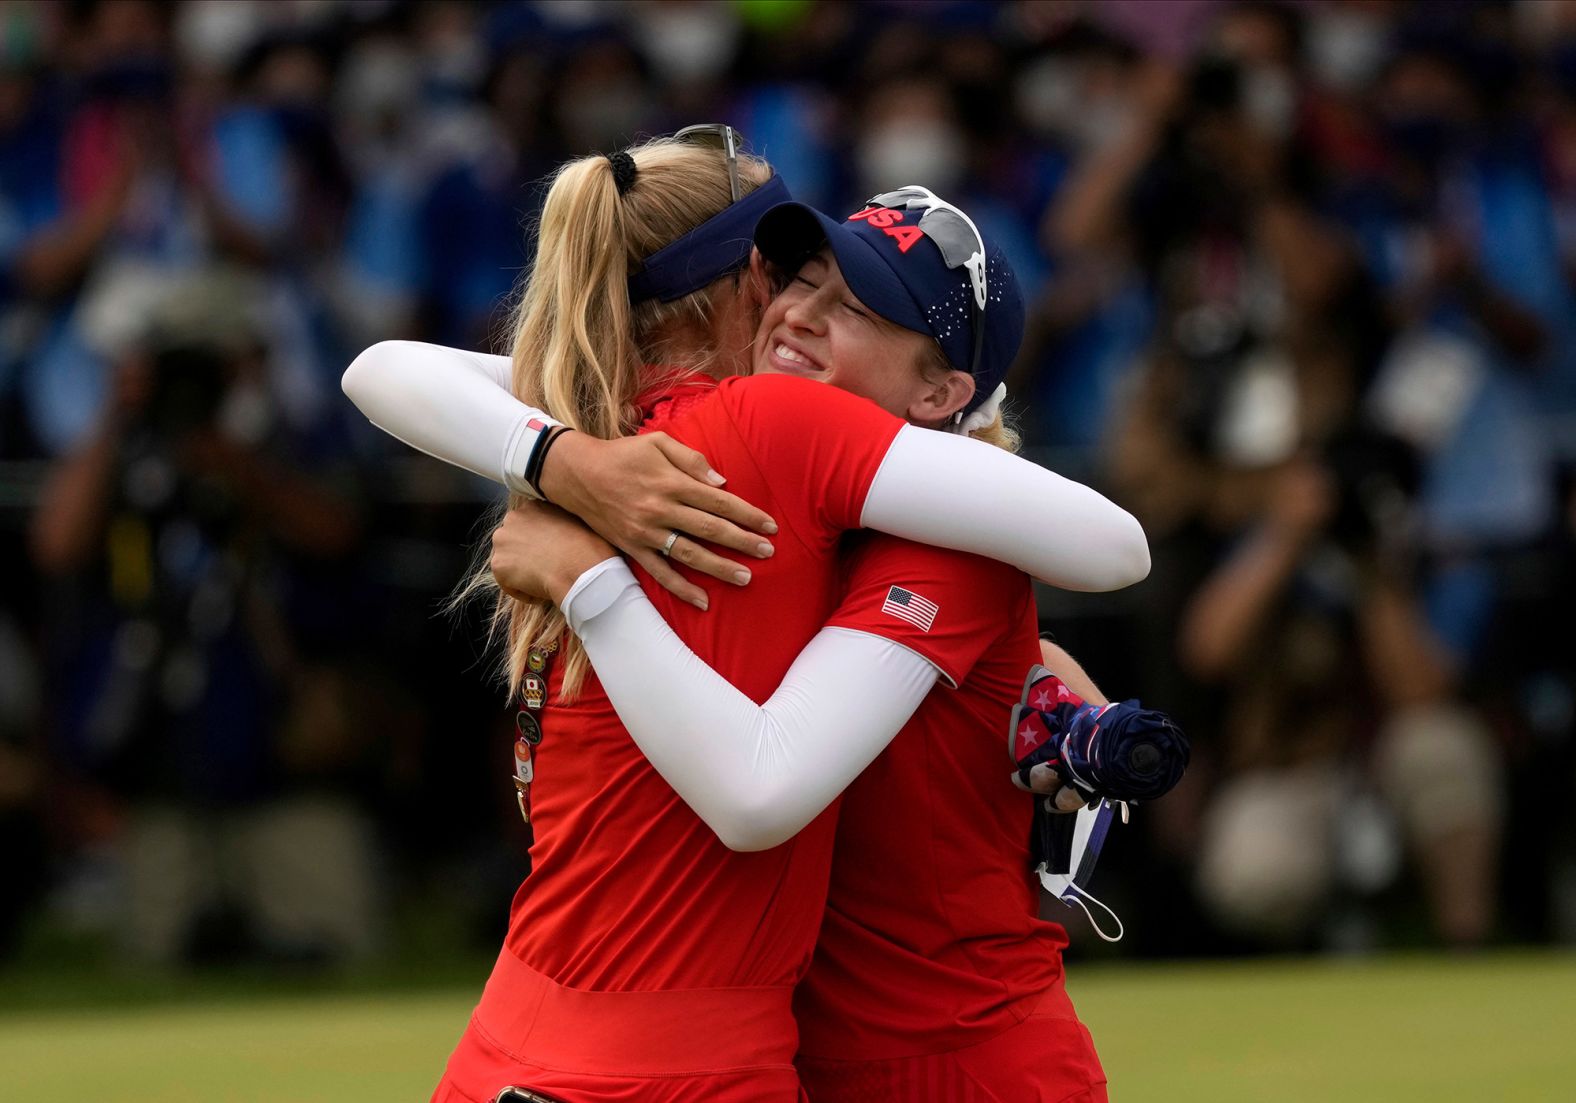 The United States' Nelly Korda, right, is congratulated by her sister, Jessica, after <a href="index.php?page=&url=https%3A%2F%2Fwww.cnn.com%2Fworld%2Flive-news%2Ftokyo-2020-olympics-08-07-21-spt%2Fh_1ef78f509d1f661ba17cbf7cac6844a3" target="_blank">winning the gold medal by one stroke</a> on August 7. Nelly Korda, the world's top-ranked female golfer, took the tournament lead after a second-round 62. Jessica Korda finished tied for 15th.